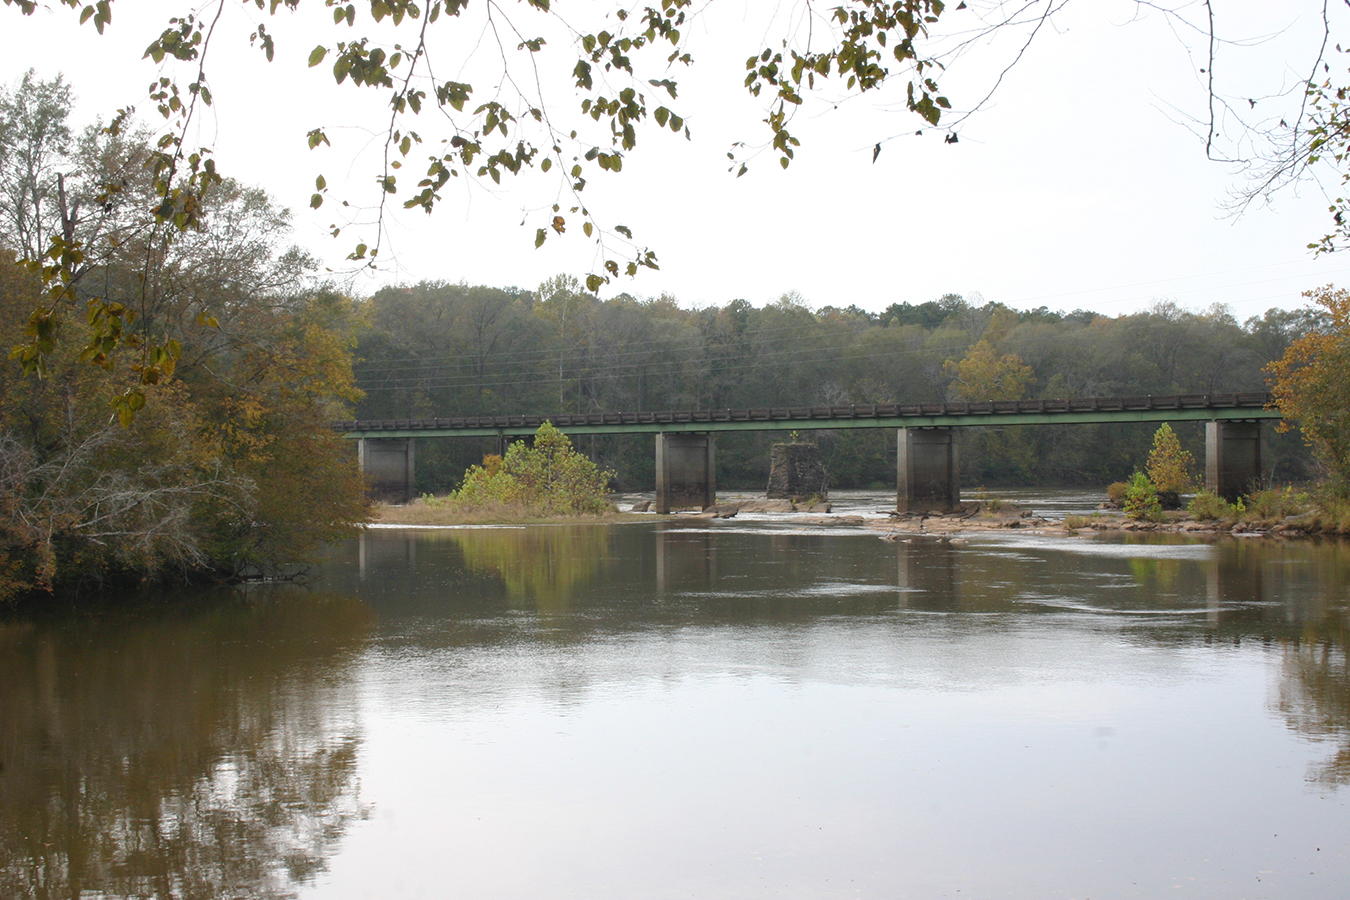 An old bridge falls into the Tallapoosa River at Horseshoe Bend. A new bridge has been constructed in front of it. Photo by Leigh Bloch.